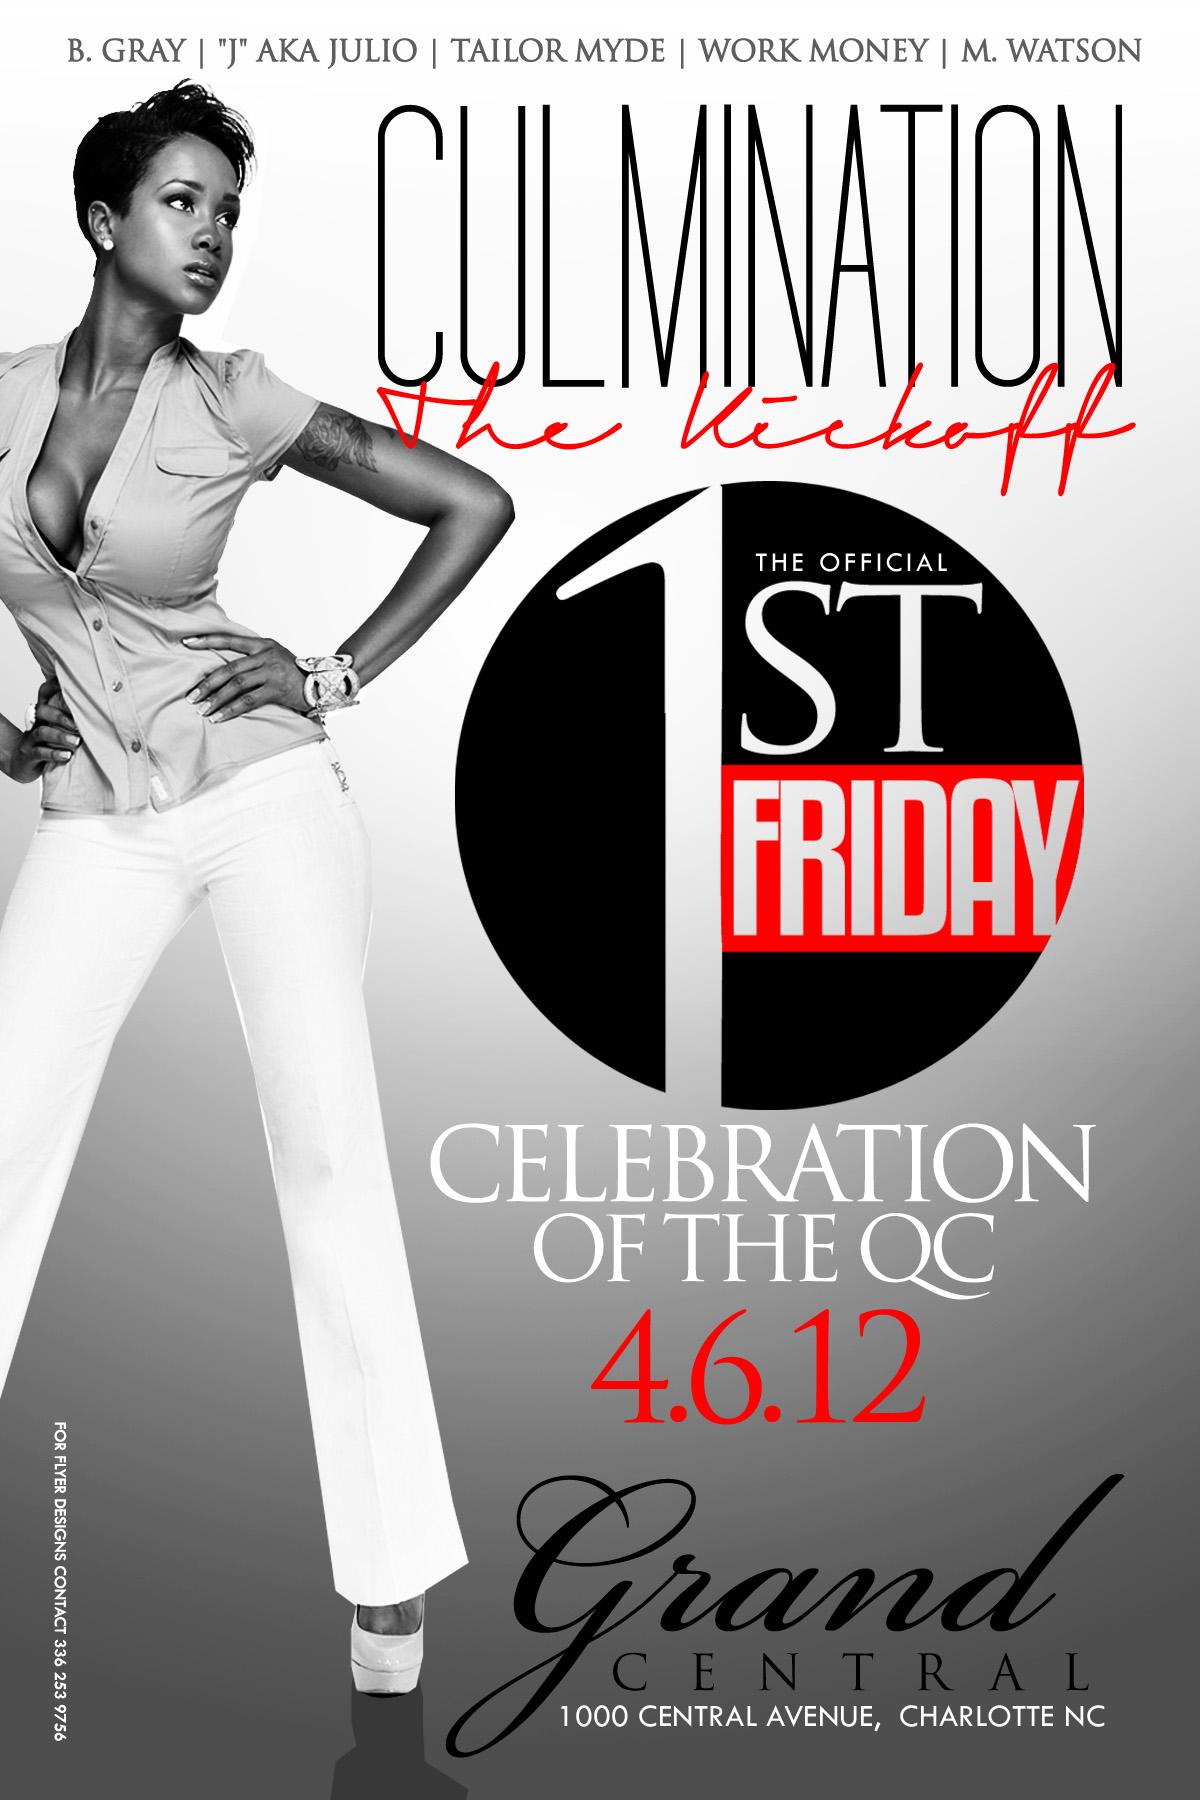 CULMINATION | CHARLOTTE’S OFFICIAL 1ST FRIDAY